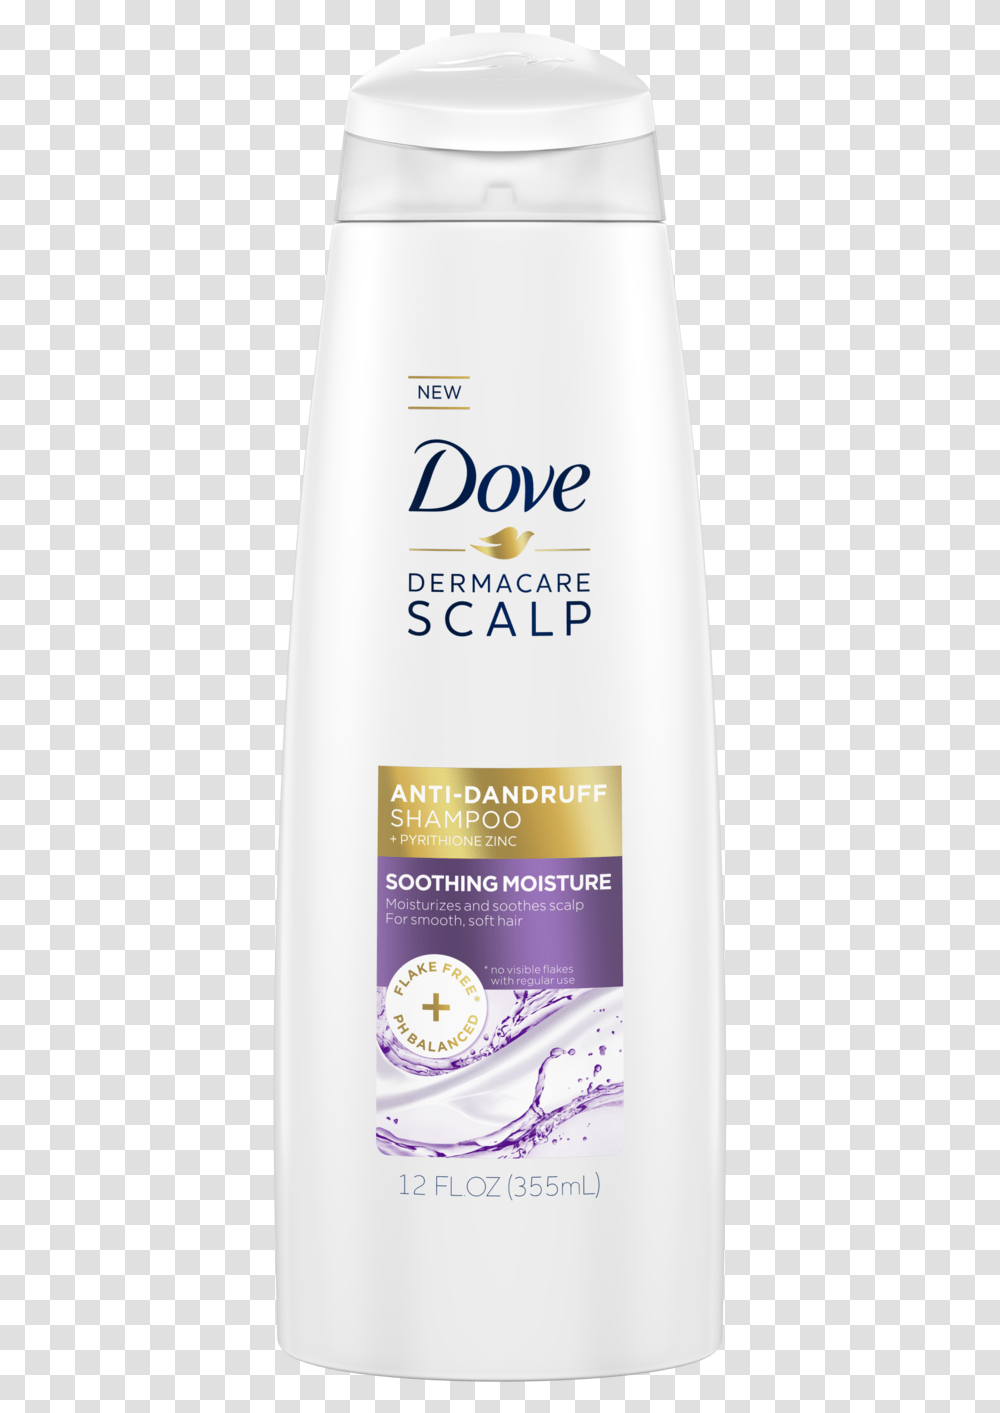 Dove Dermacare Scalp Soothing Moisture Anti Dandruff 1 Dove Dermacare Scalp Anti Dandruff Shampoo, Bottle, Shaker, Cosmetics Transparent Png